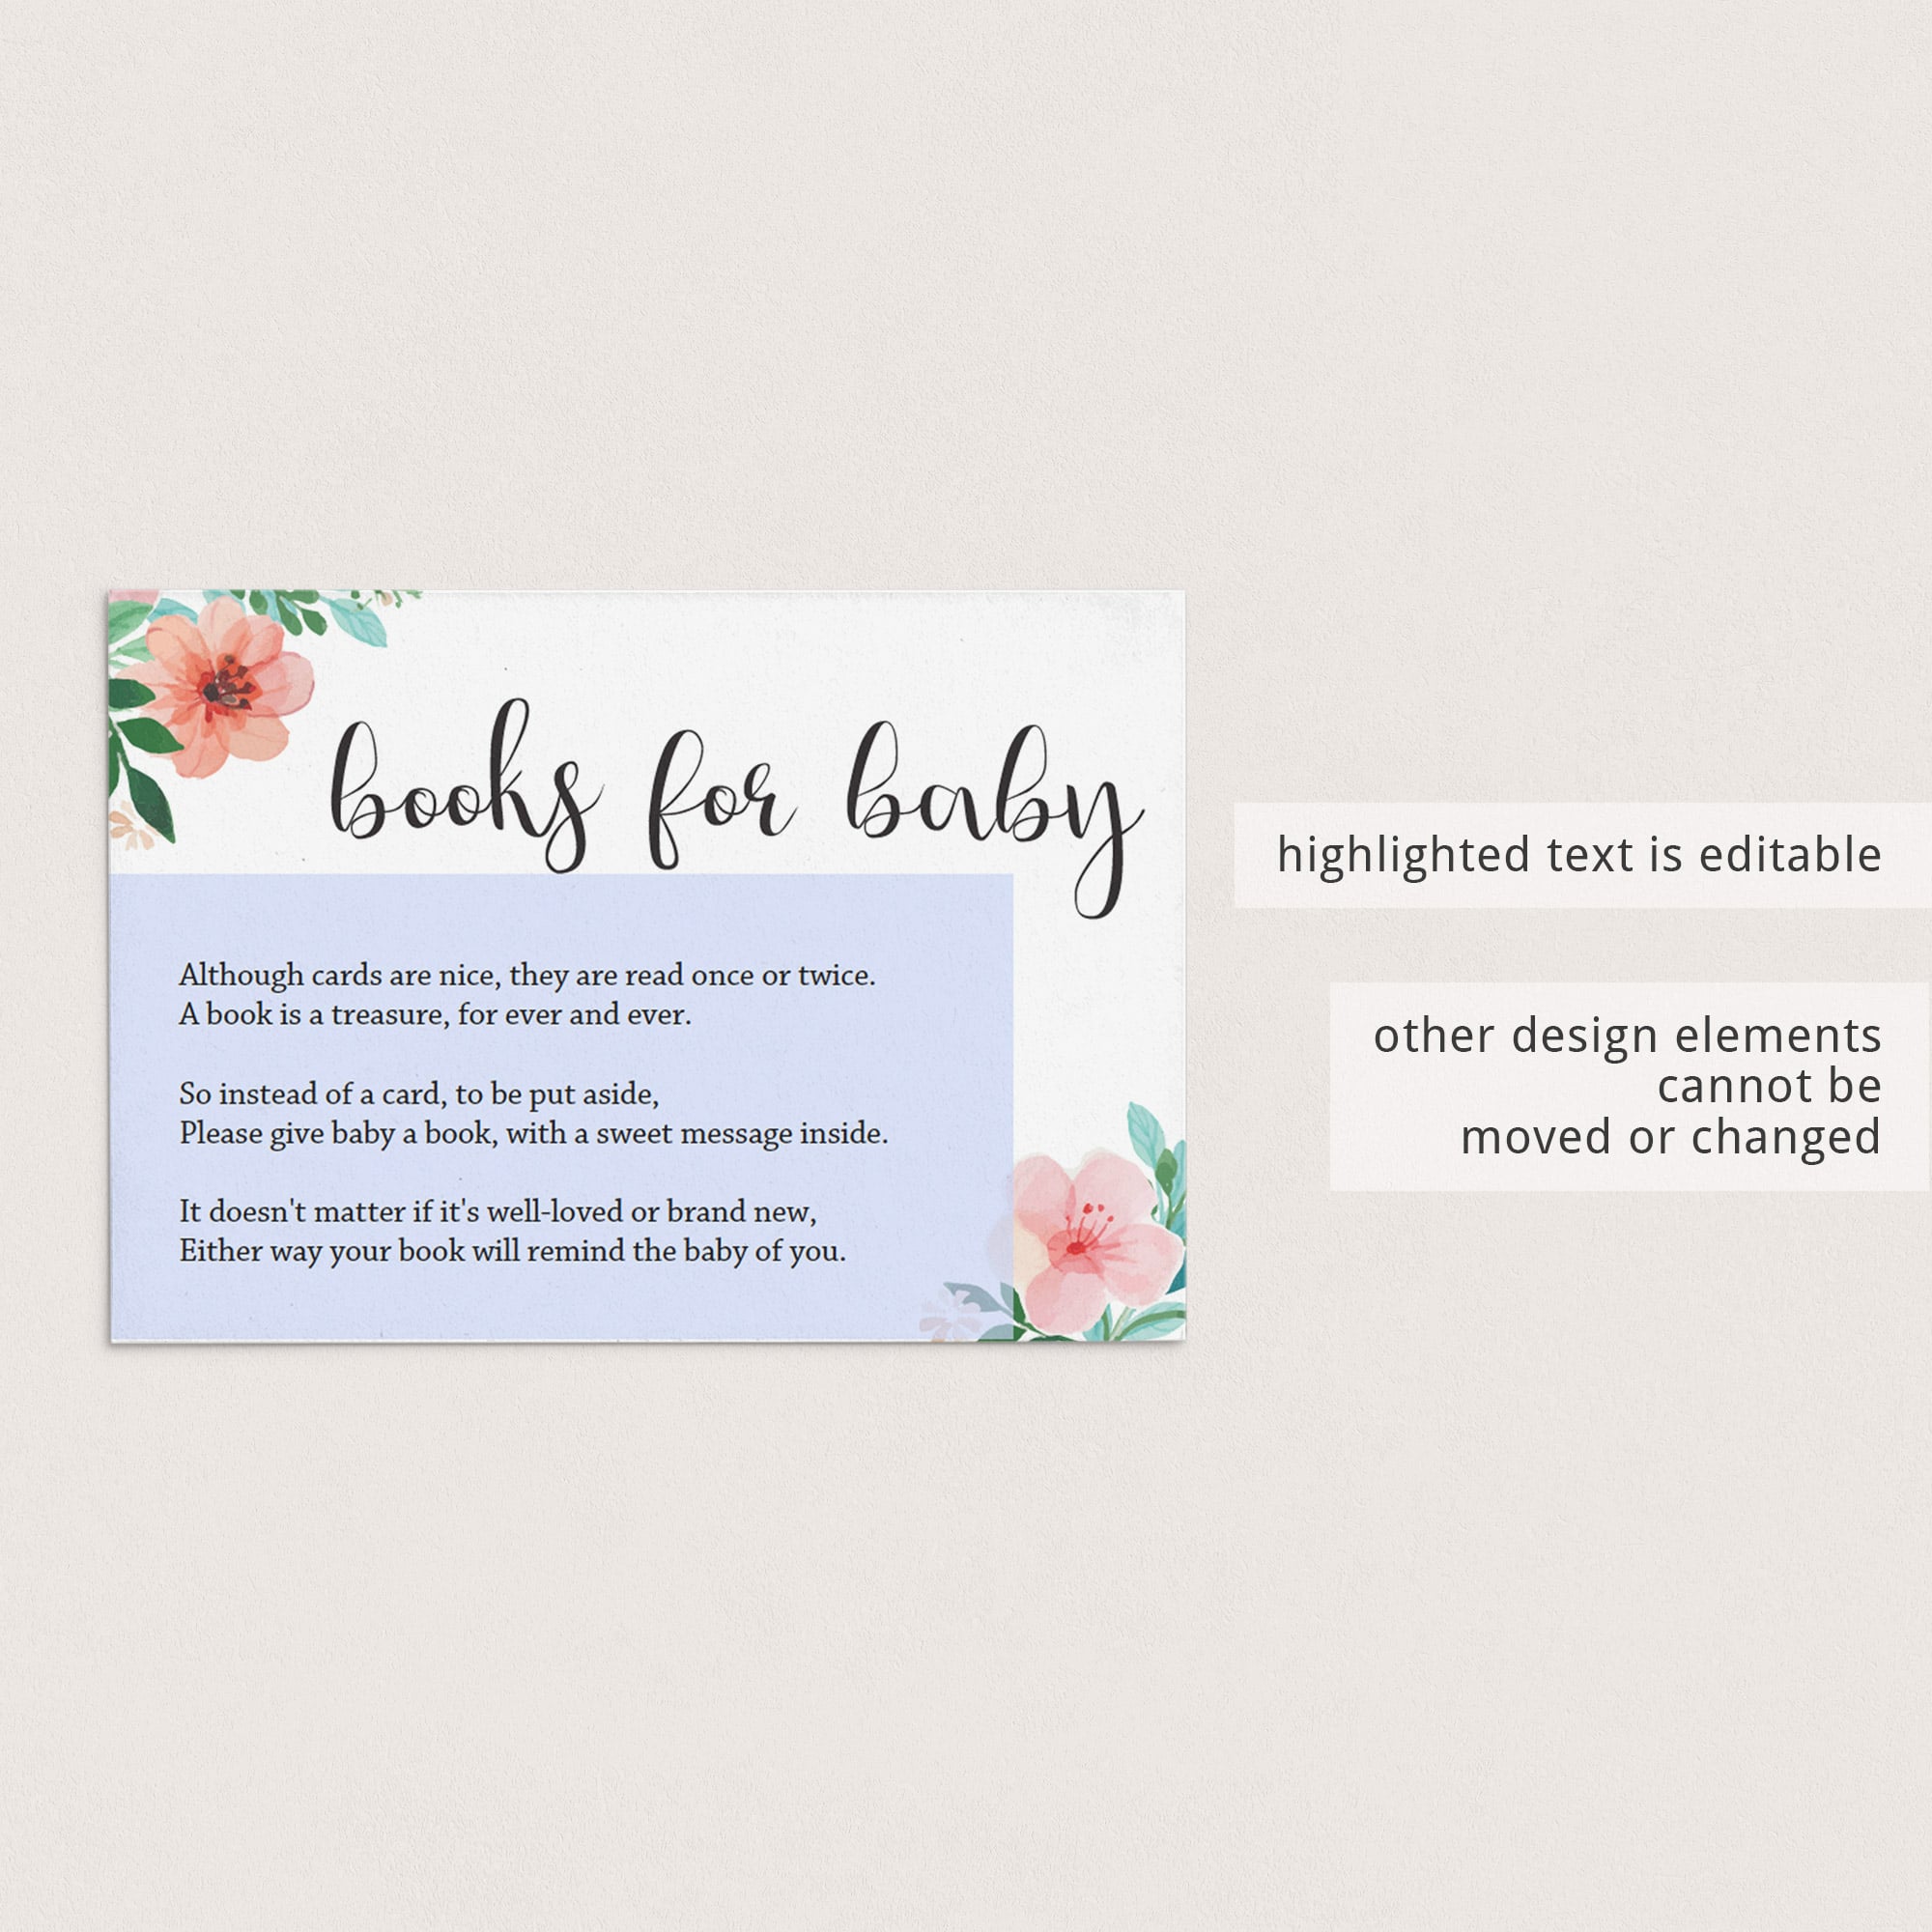 Printable books for baby cards for floral themed baby shower by LittleSizzle